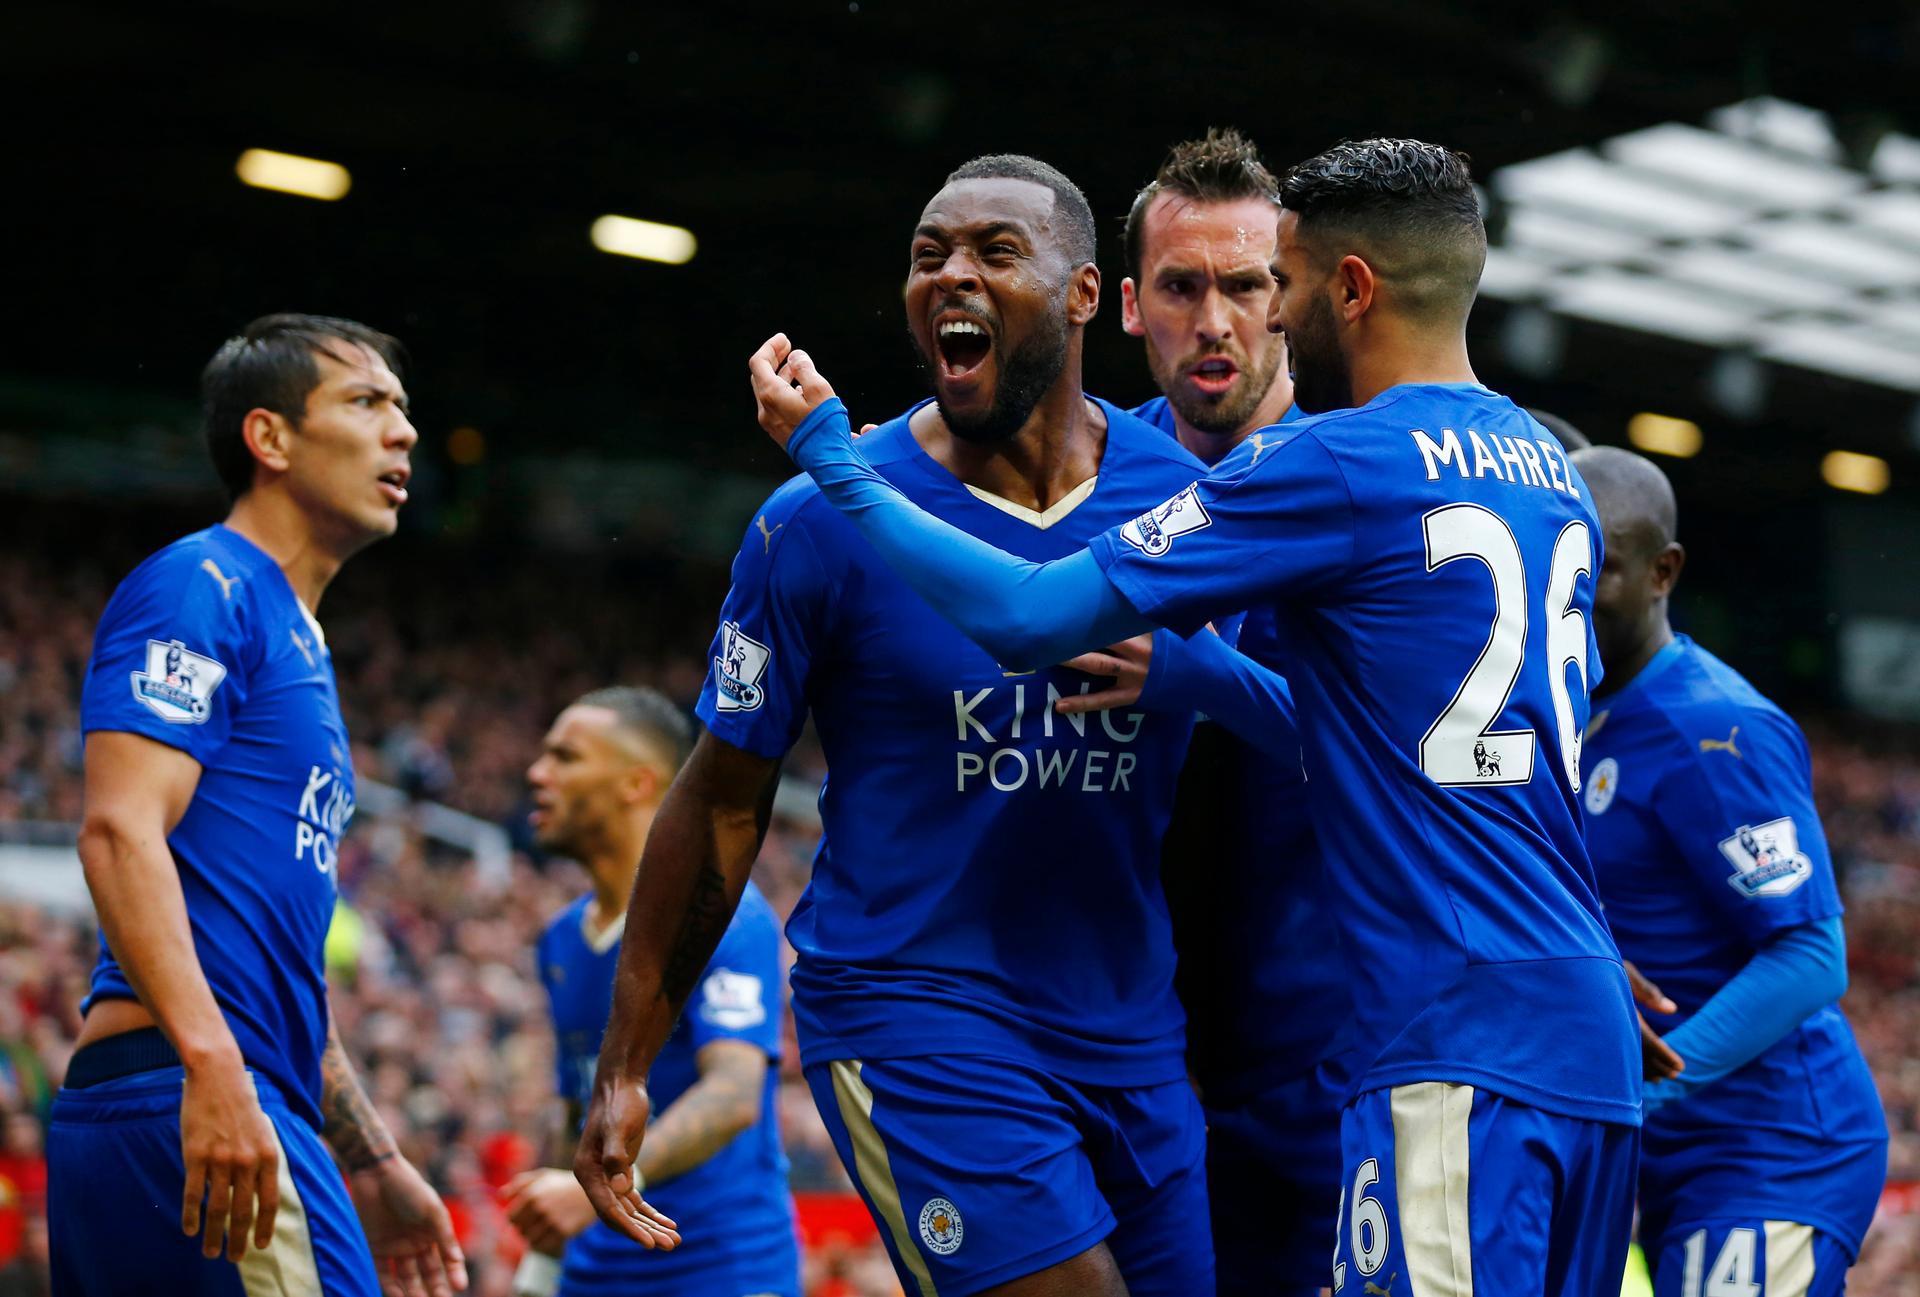 Leicester City's Wes Morgan celebrates scoring their first goal versus Manchester United, May 1, 2016.